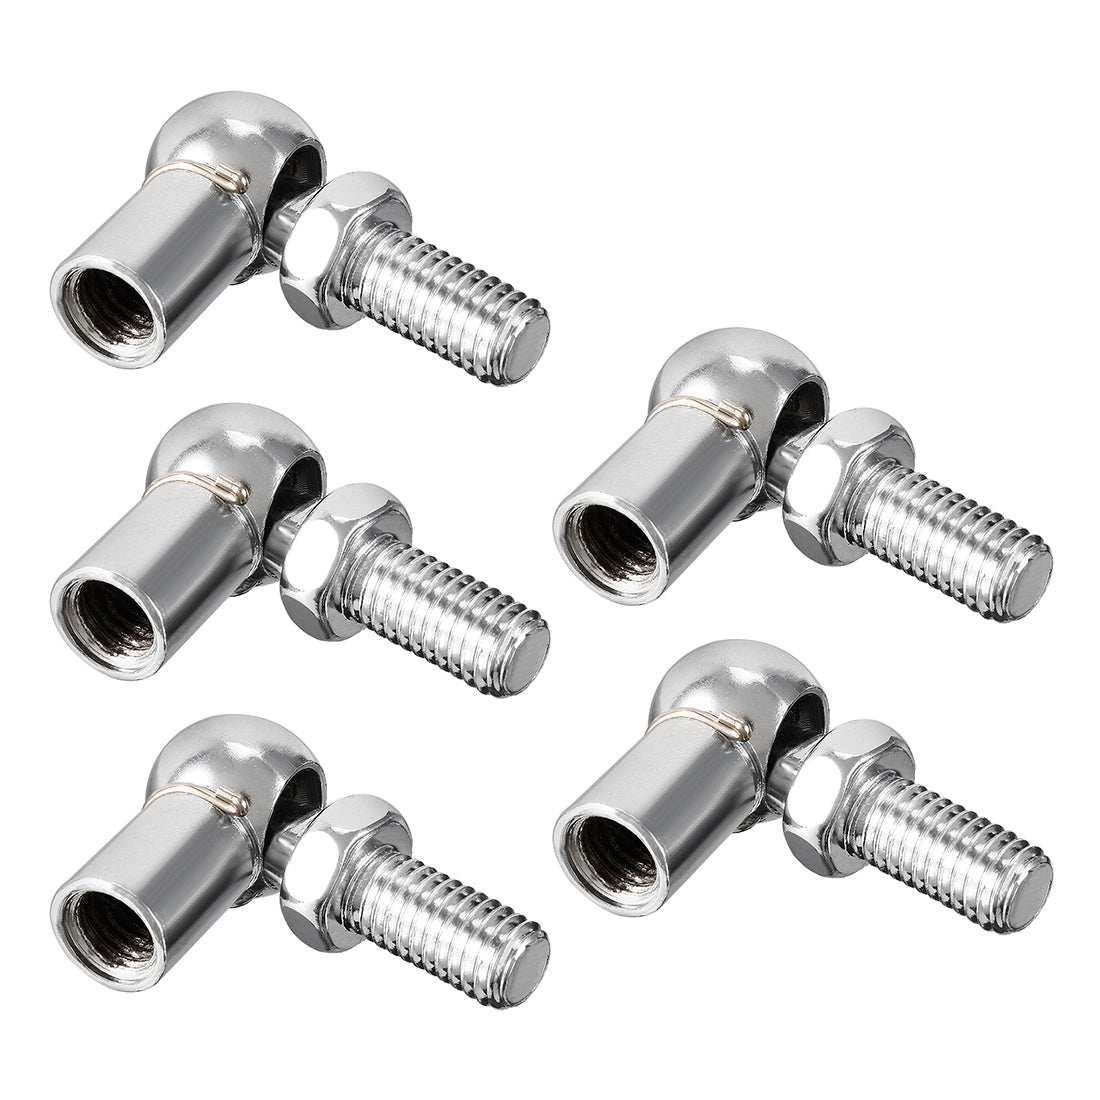 uxcell Uxcell Gas Spring End Fitting M6 Female Thread 8mm Round Handle Dia A3 Steel 5pcs